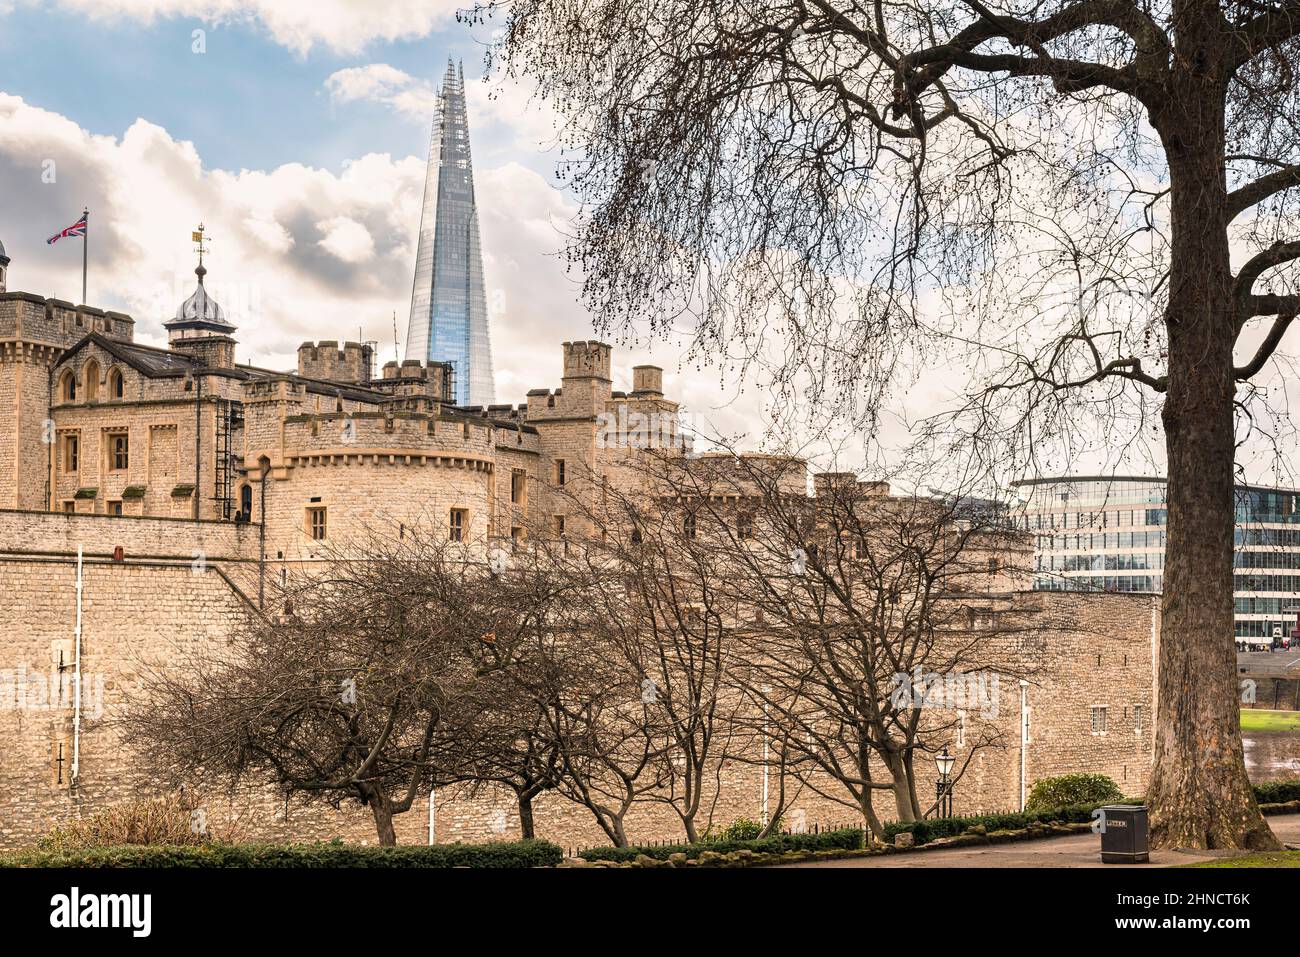 The Tower of London with The Shard glass tower in the background. The old and the new. Changes in architecture Stock Photo